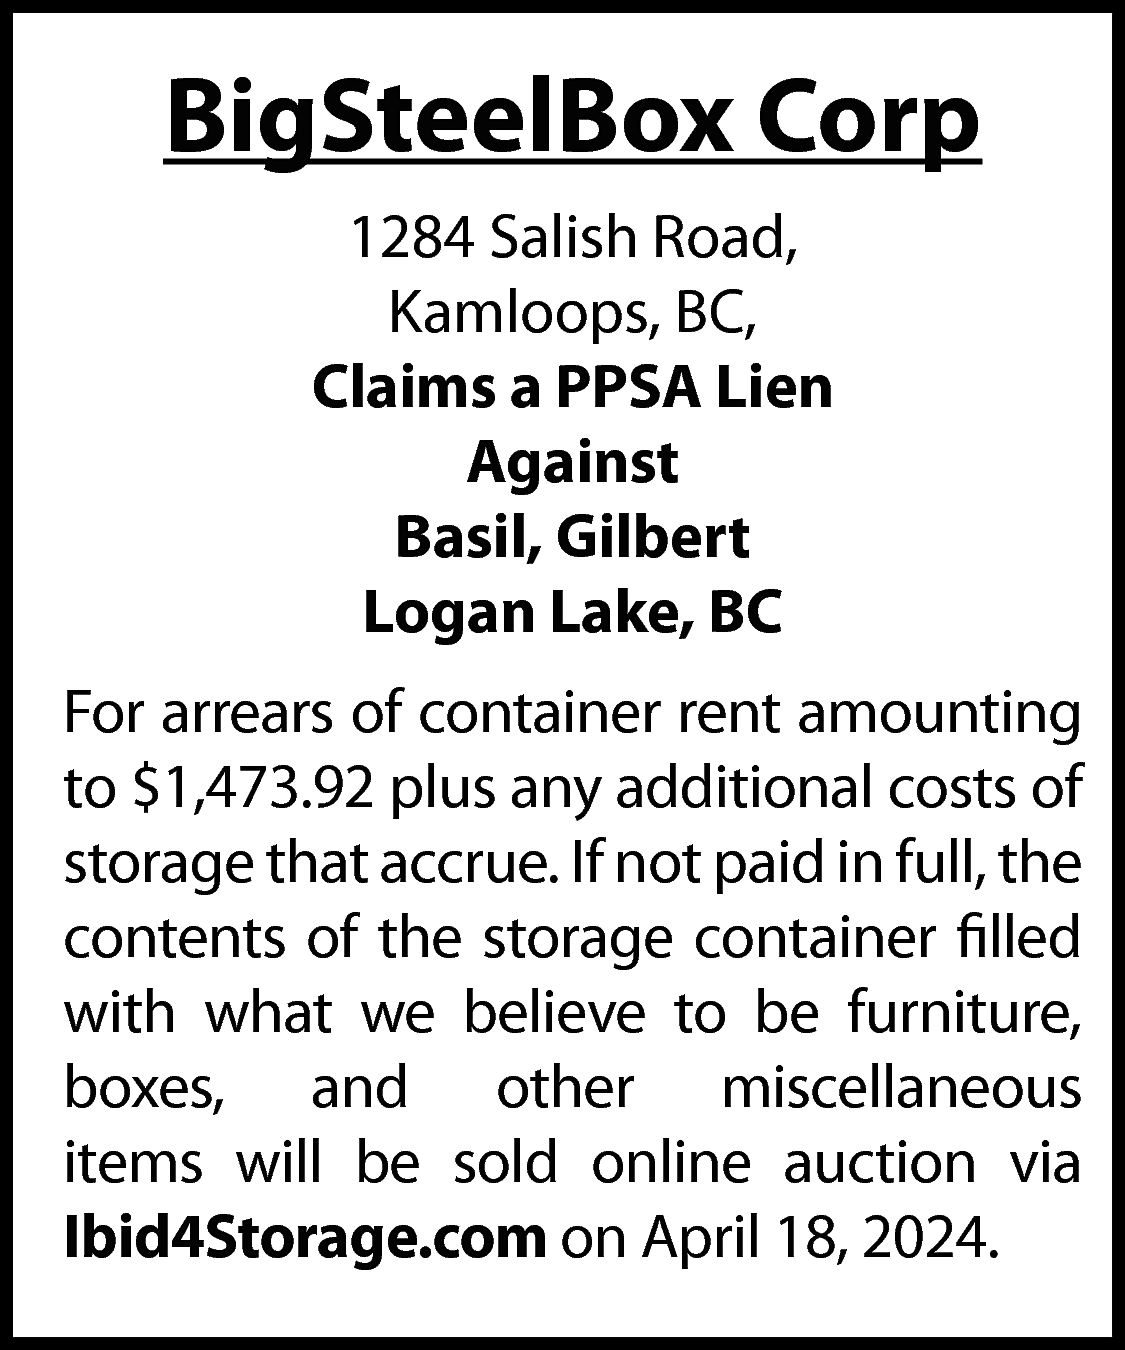 BigSteelBox Corp <br>1284 Salish Road,  BigSteelBox Corp  1284 Salish Road,  Kamloops, BC,  Claims a PPSA Lien  Against  Basil, Gilbert  Logan Lake, BC  For arrears of container rent amounting  to $1,473.92 plus any additional costs of  storage that accrue. If not paid in full, the  contents of the storage container filled  with what we believe to be furniture,  boxes, and other miscellaneous  items will be sold online auction via  Ibid4Storage.com on April 18, 2024.    